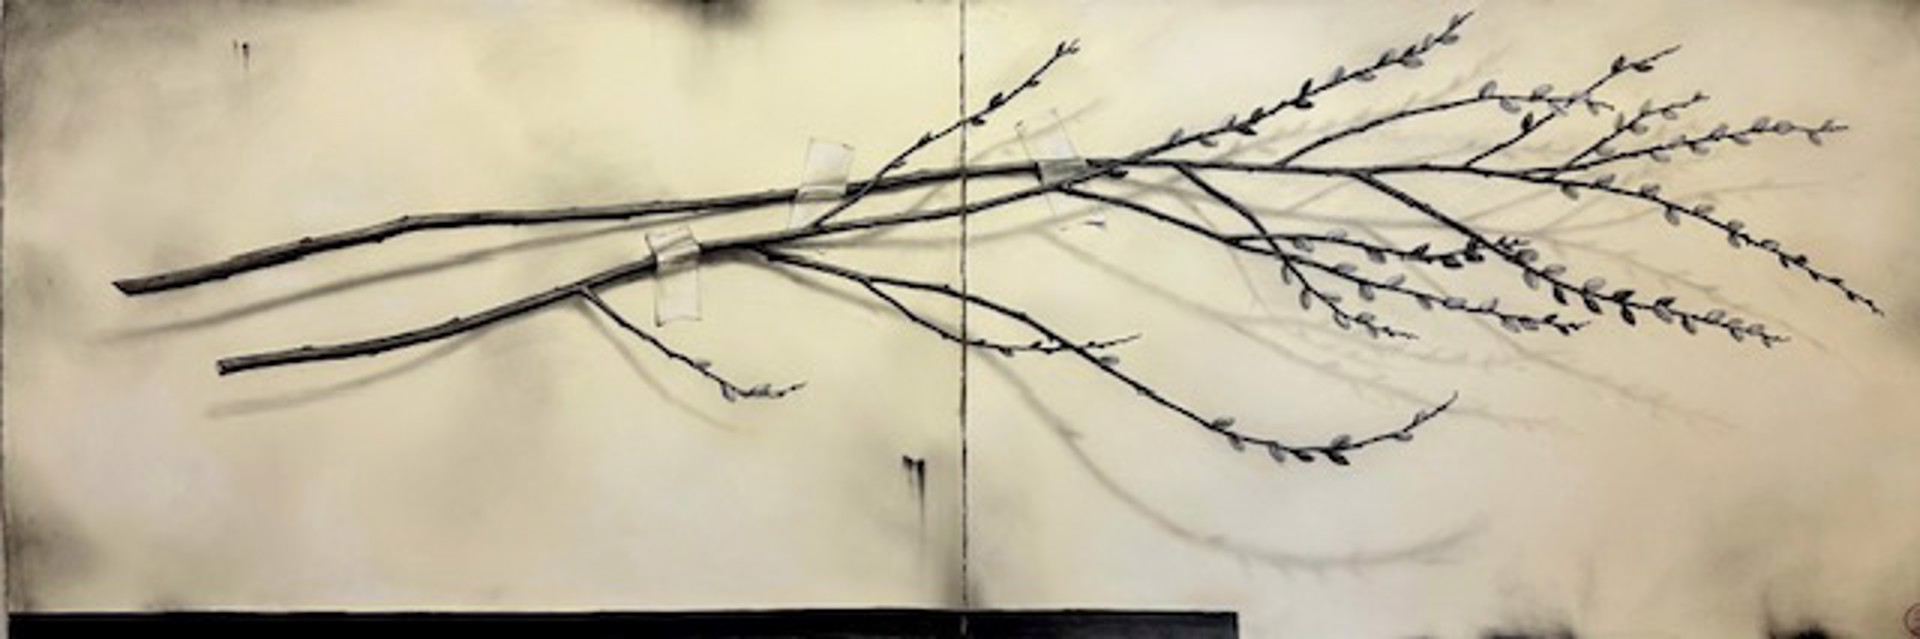 Two Panel Pussy Willow Branch by Emily Farish